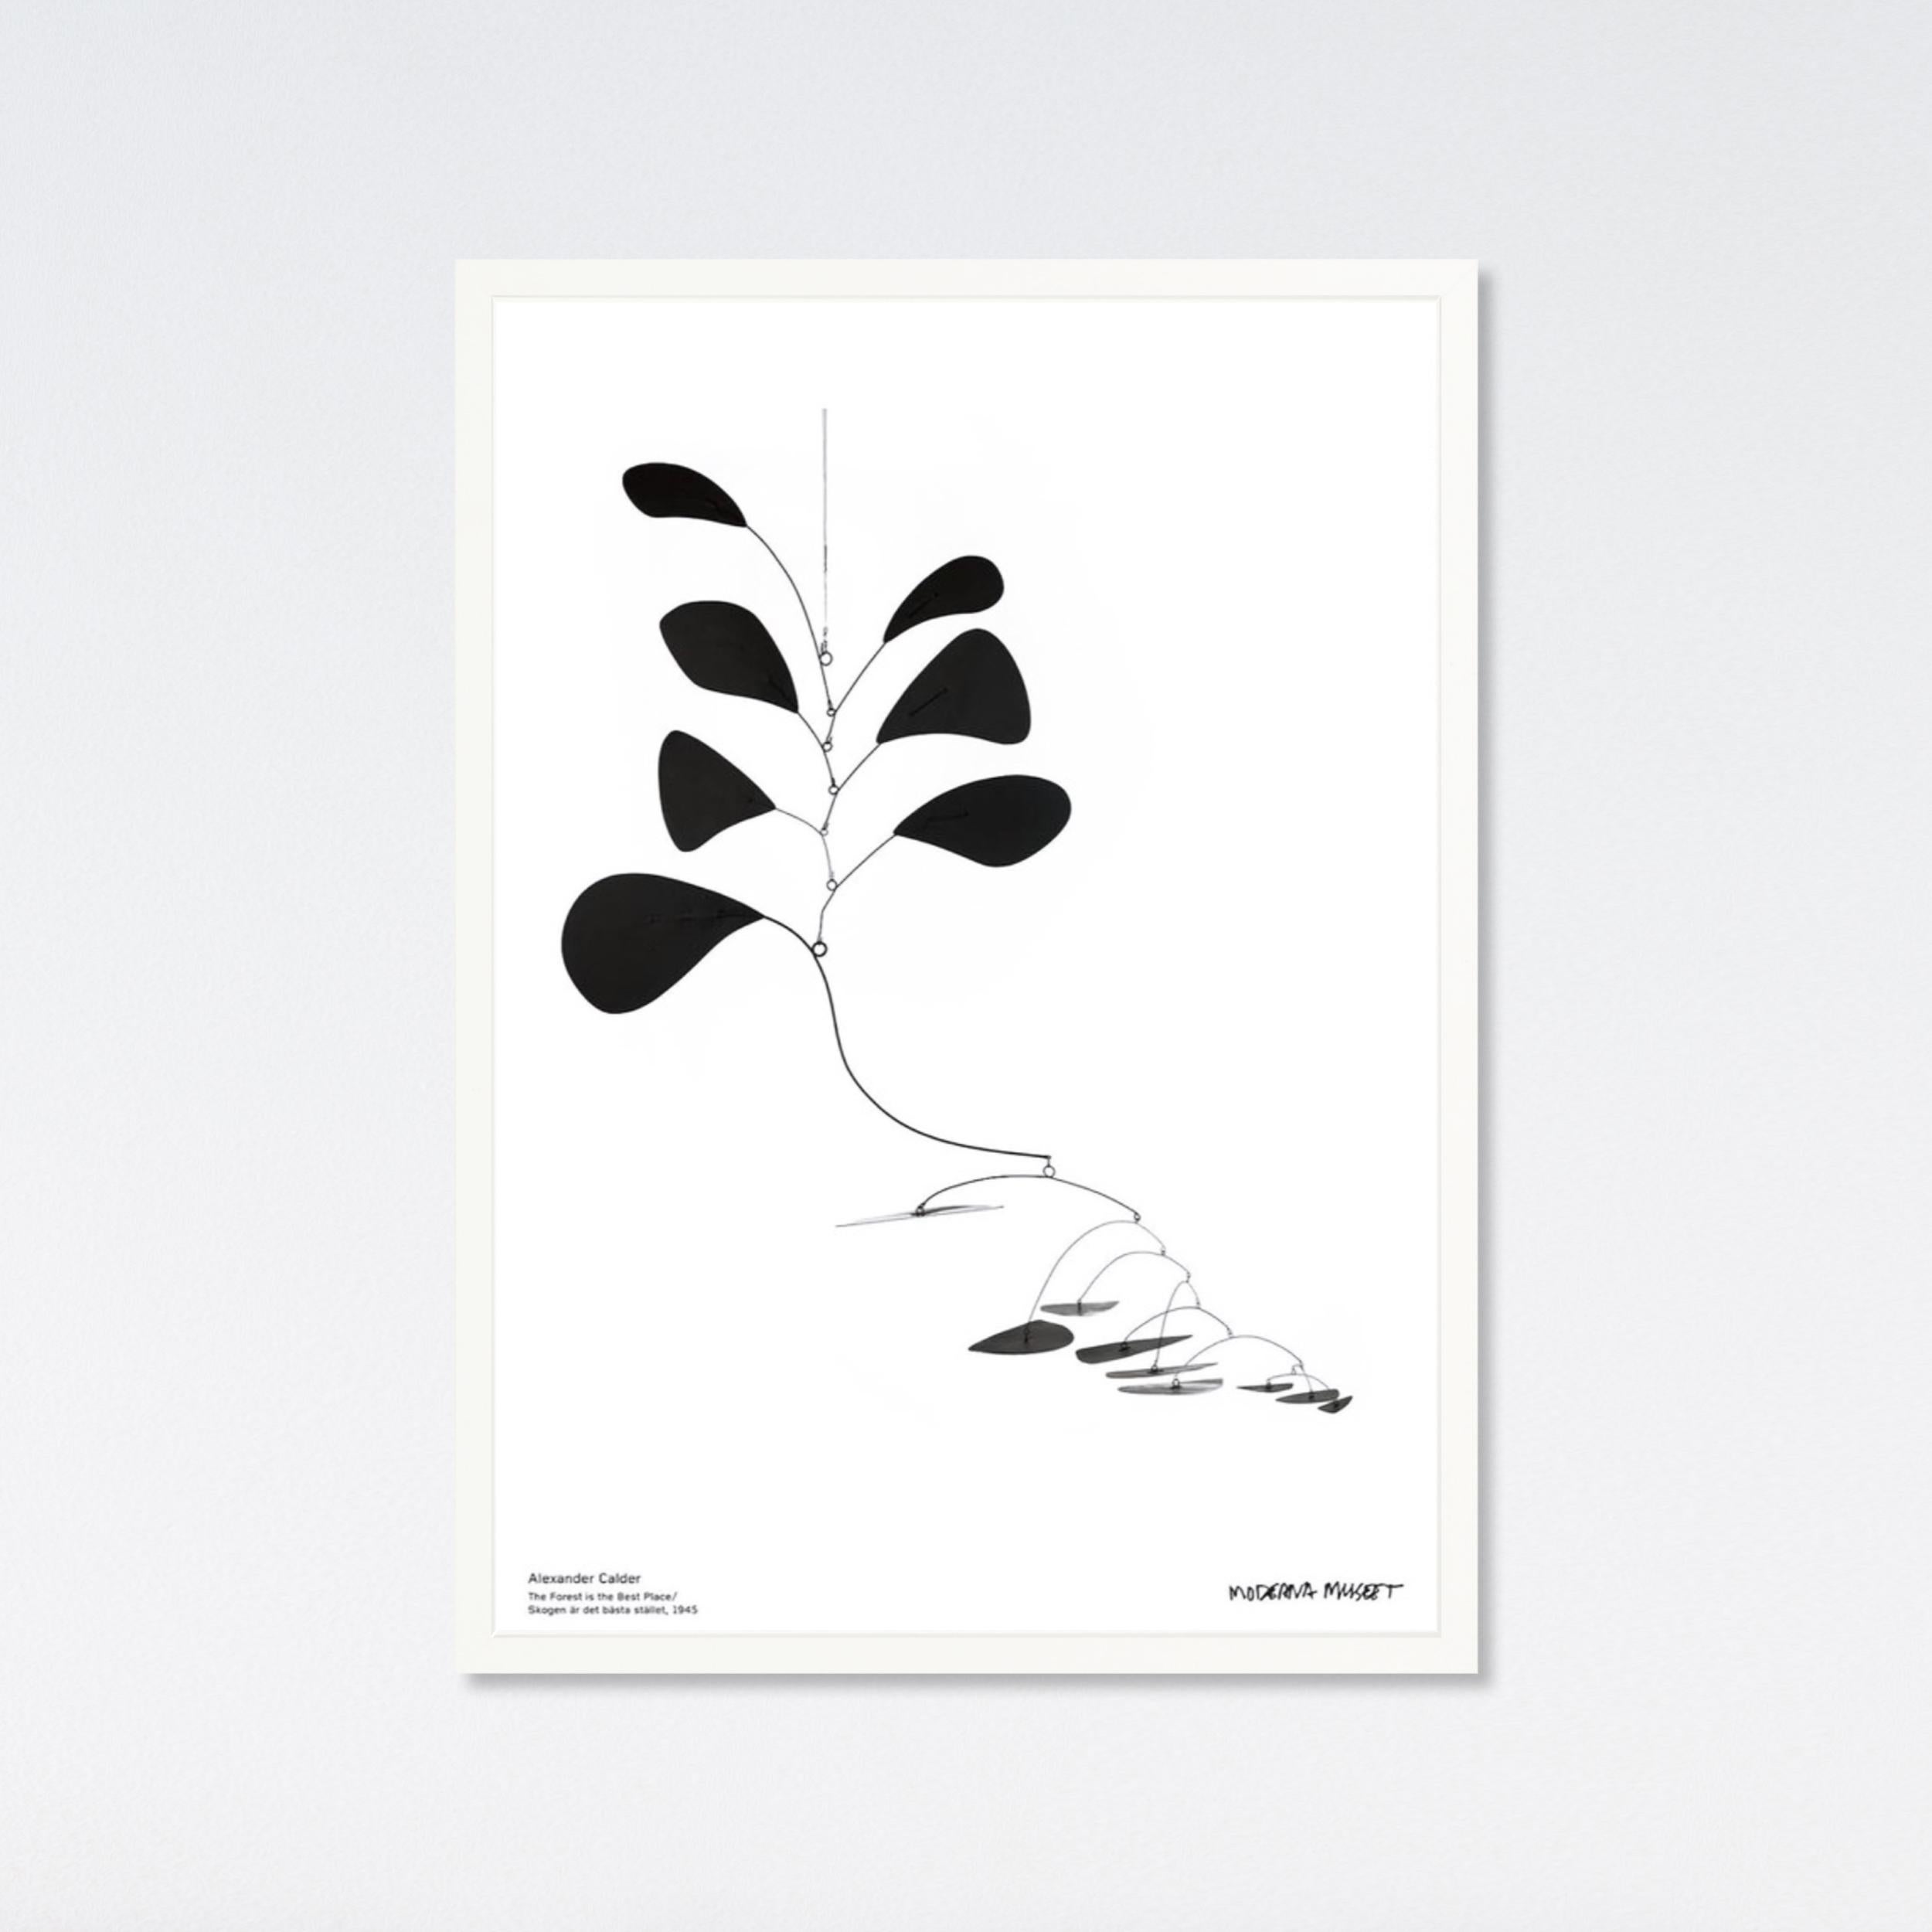 Alexander Calder, The Forest is the Best Place, 2007 Museum Poster, minimalist - Abstract Geometric Print by (after) Alexander Calder